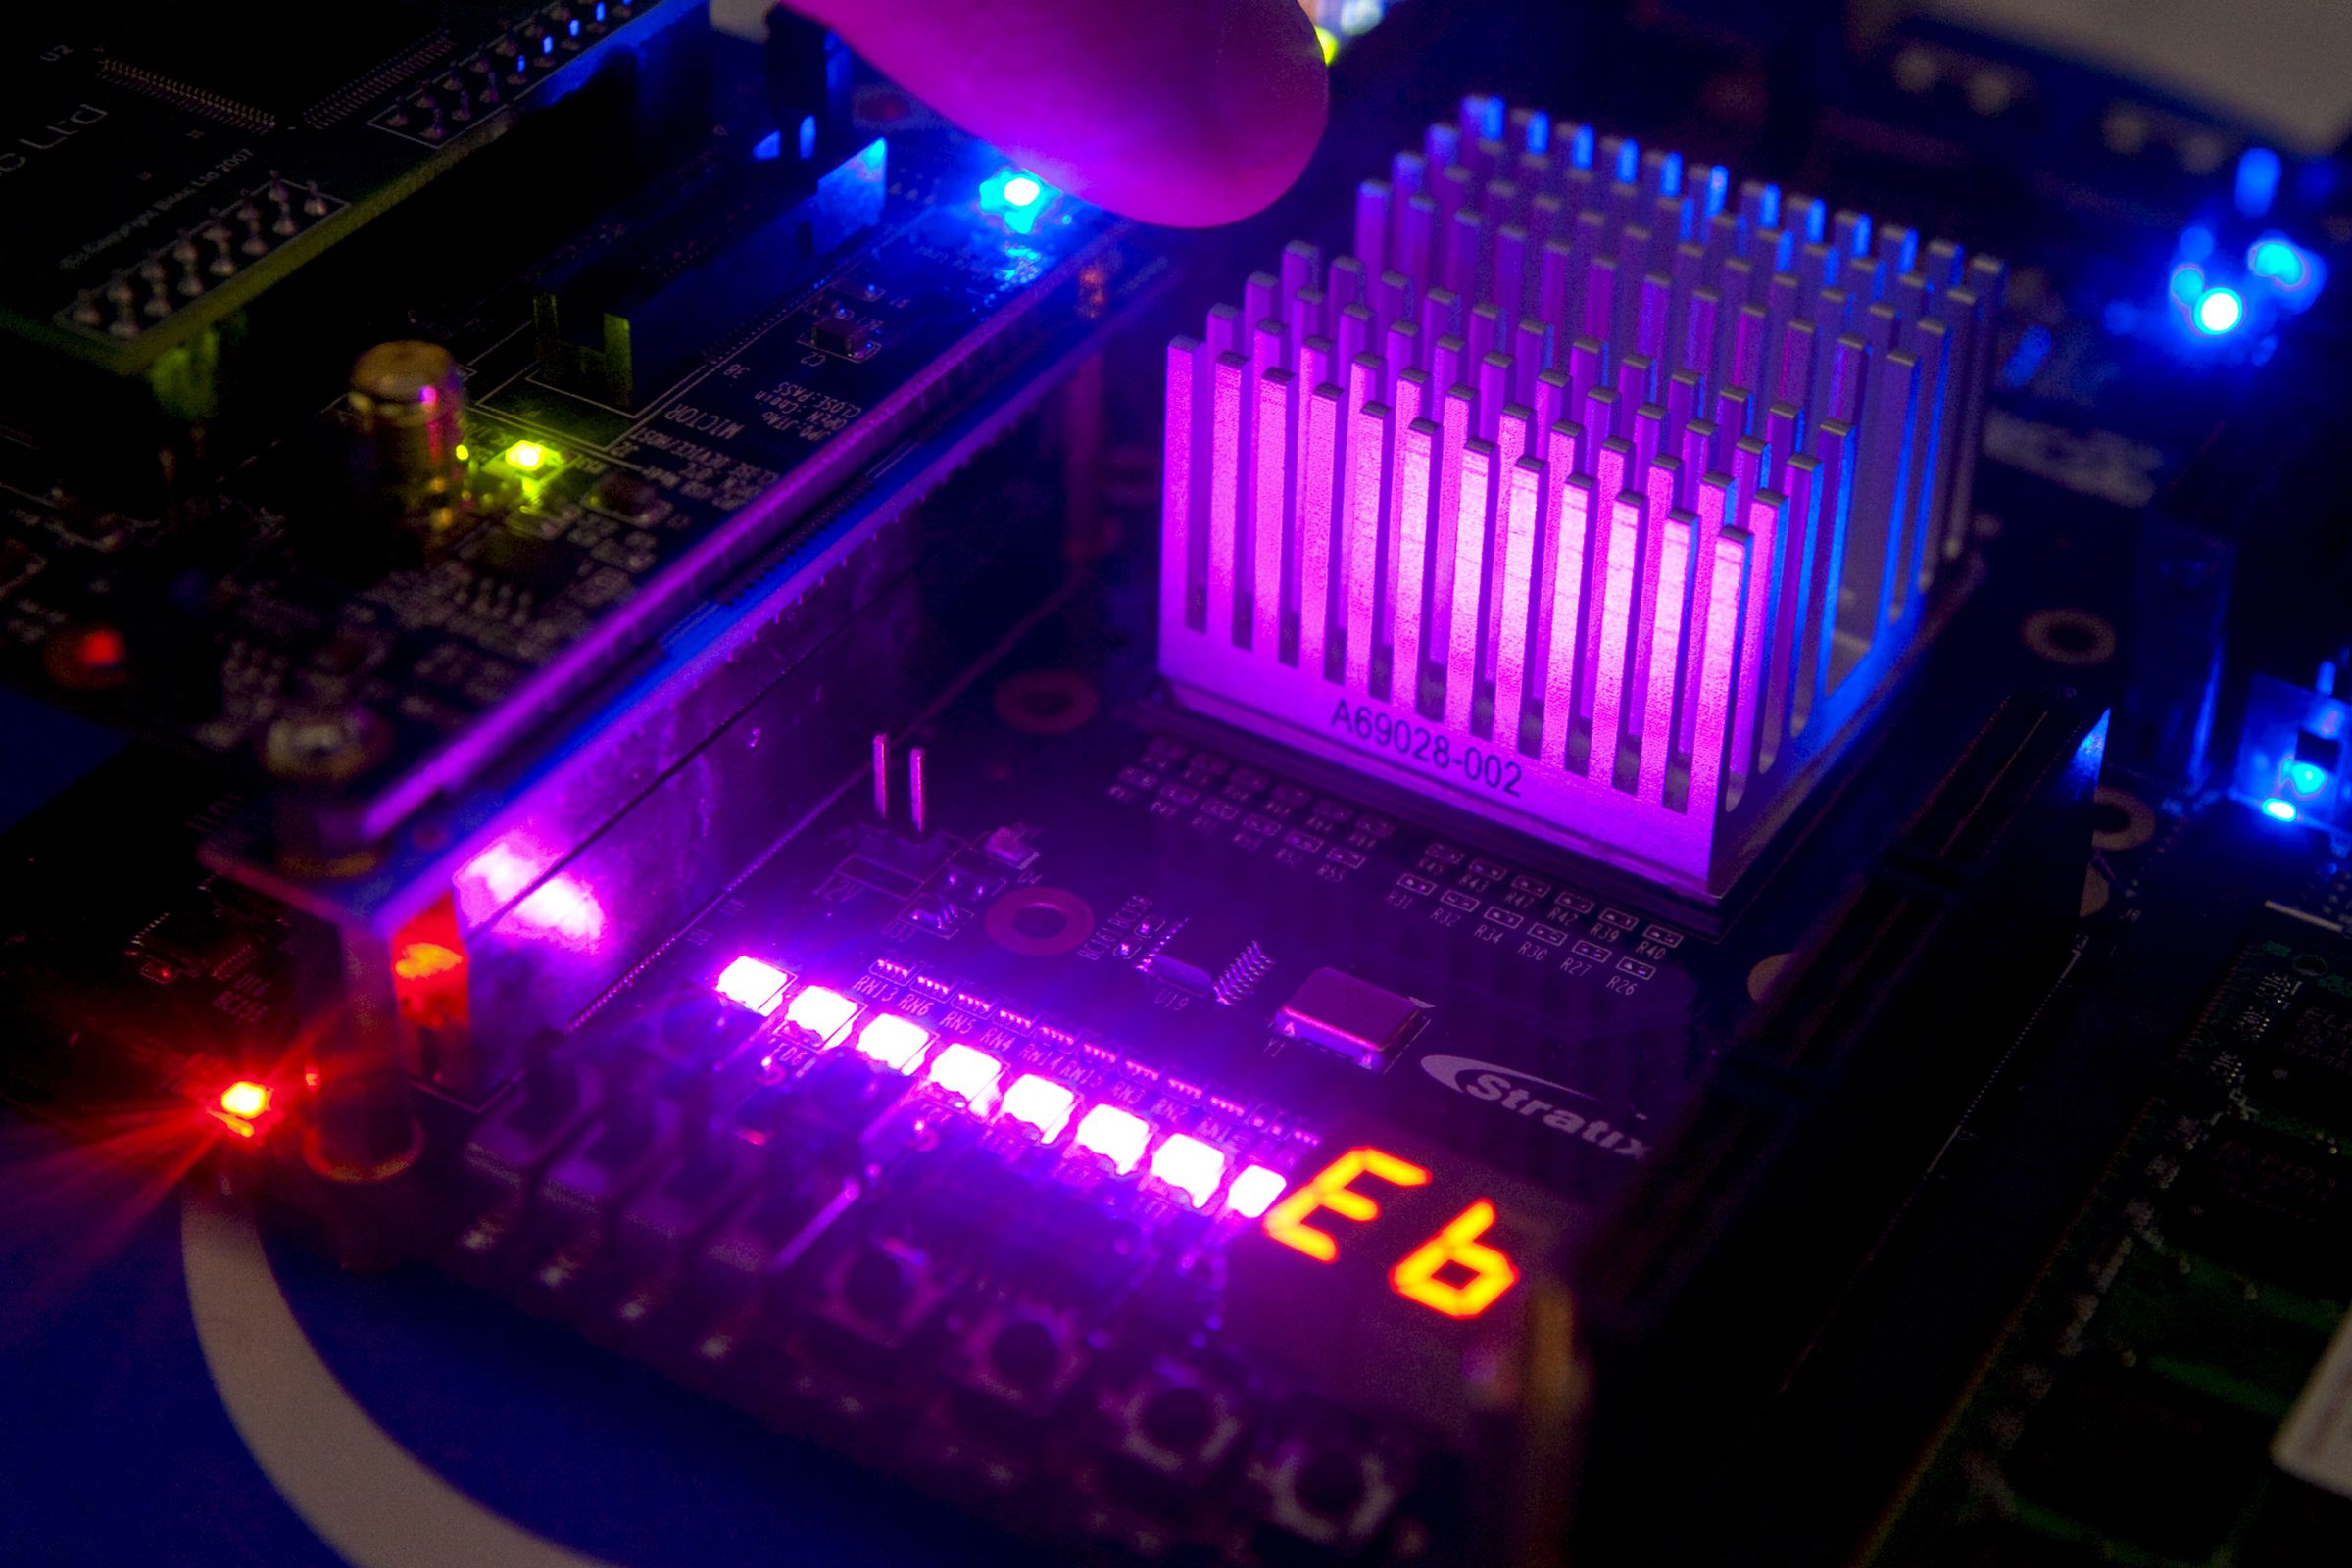 An Intel researcher points to the heat sink of a programmabl